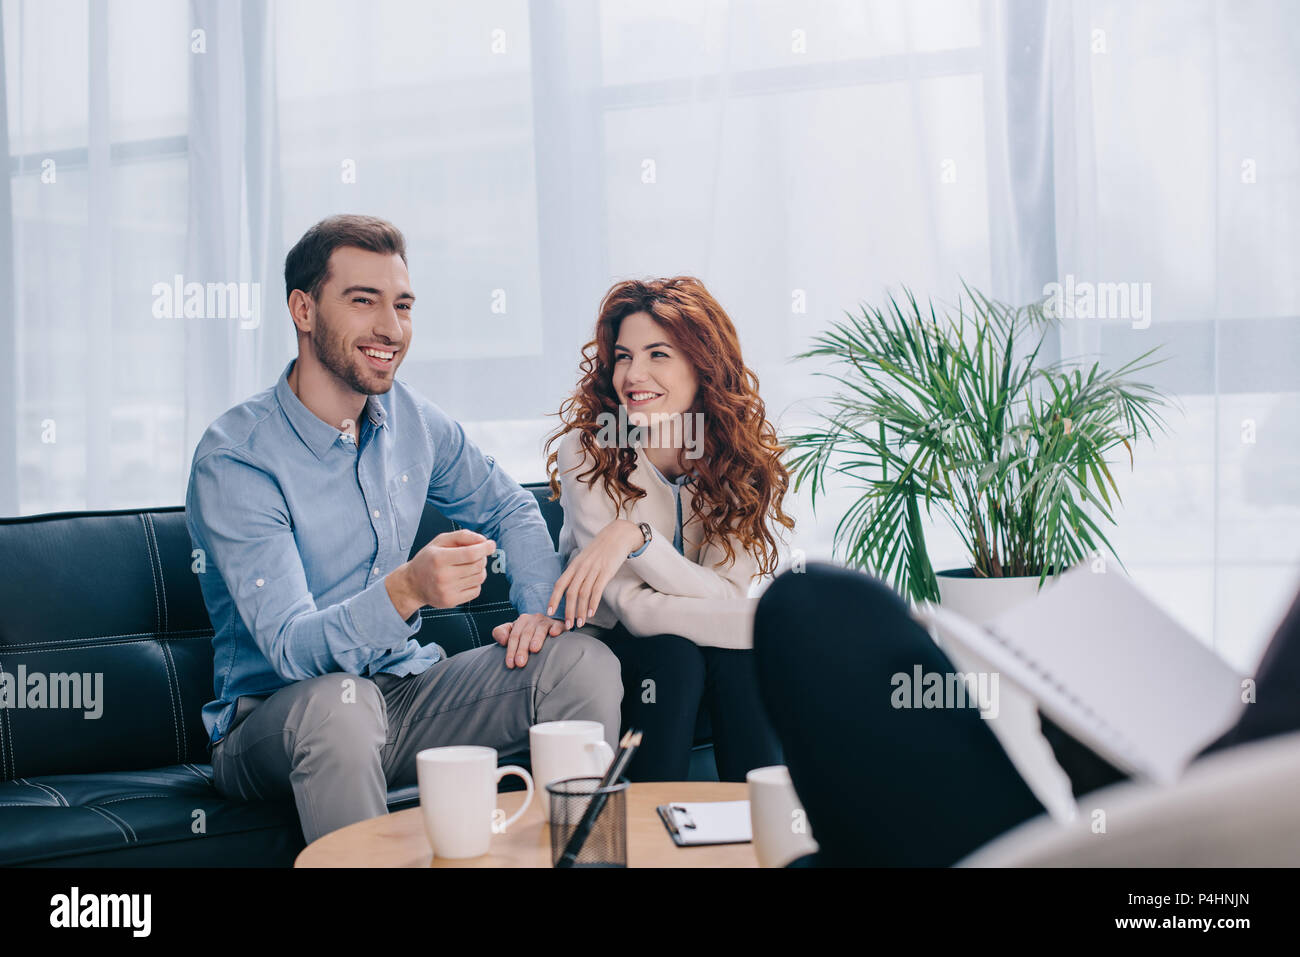 Smiling young couple sitting on sofa in counselor office Stock Photo